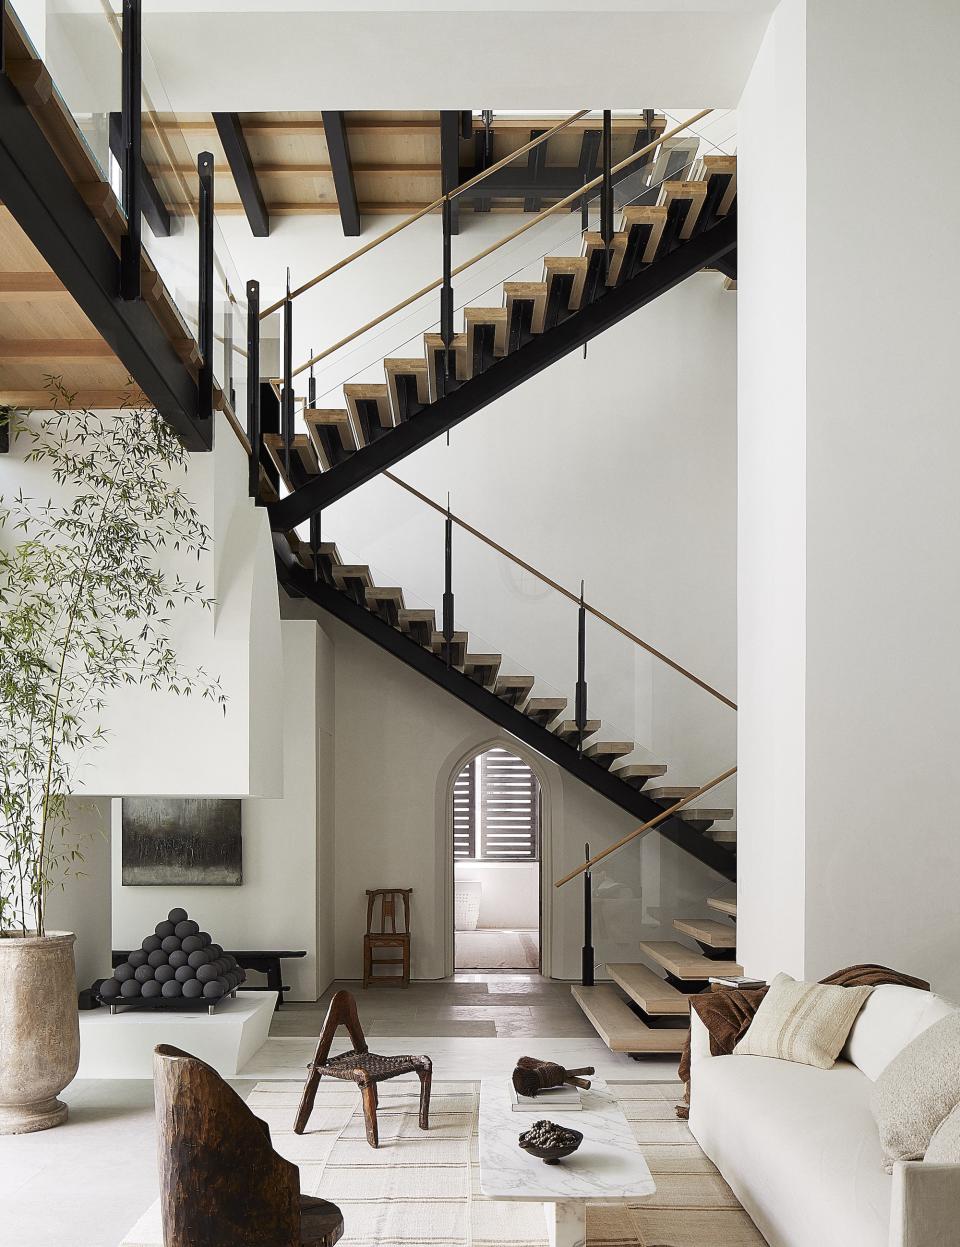 A central staircase rises several floors above a white-walled living room